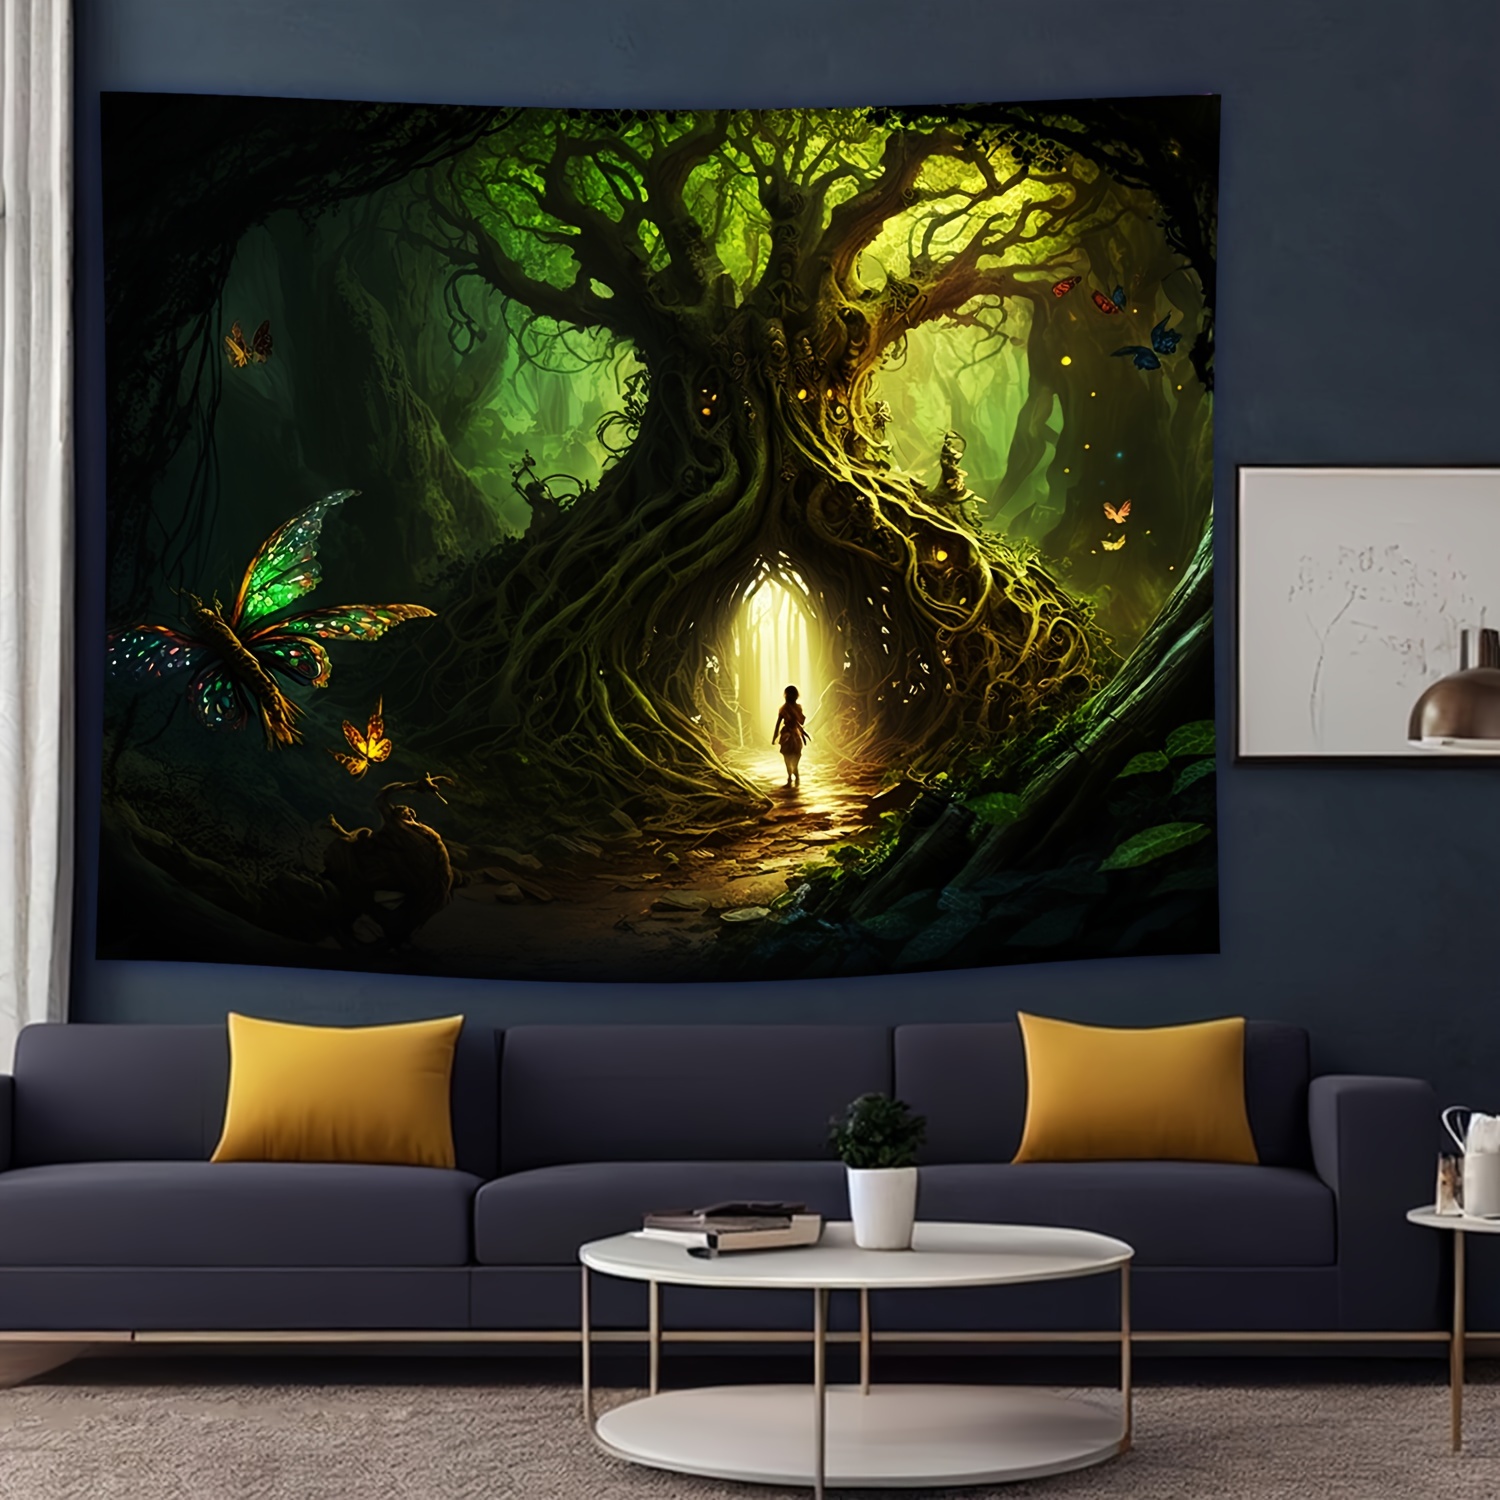 UHOMETAP Fantasy Decor Tapestry Wall Hanging, Forest Red Tree of Life  Tapestry, Fairy Tale Forest Fantasy Landscape Mysterious Tree Tapestry for  Room